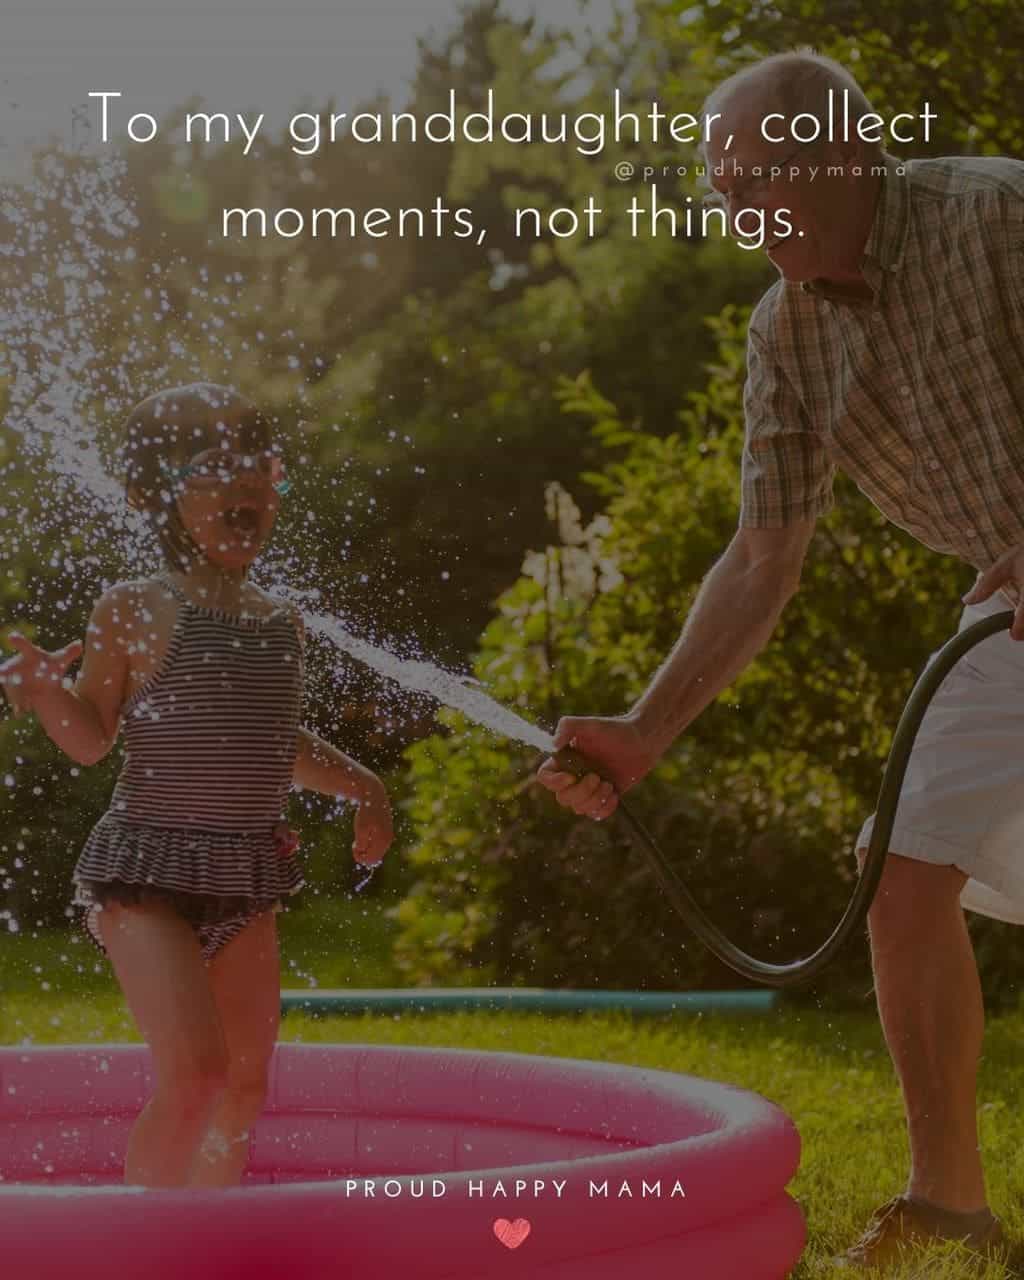 Granddaughter Quotes - To my granddaughter, collect moments, not things.’